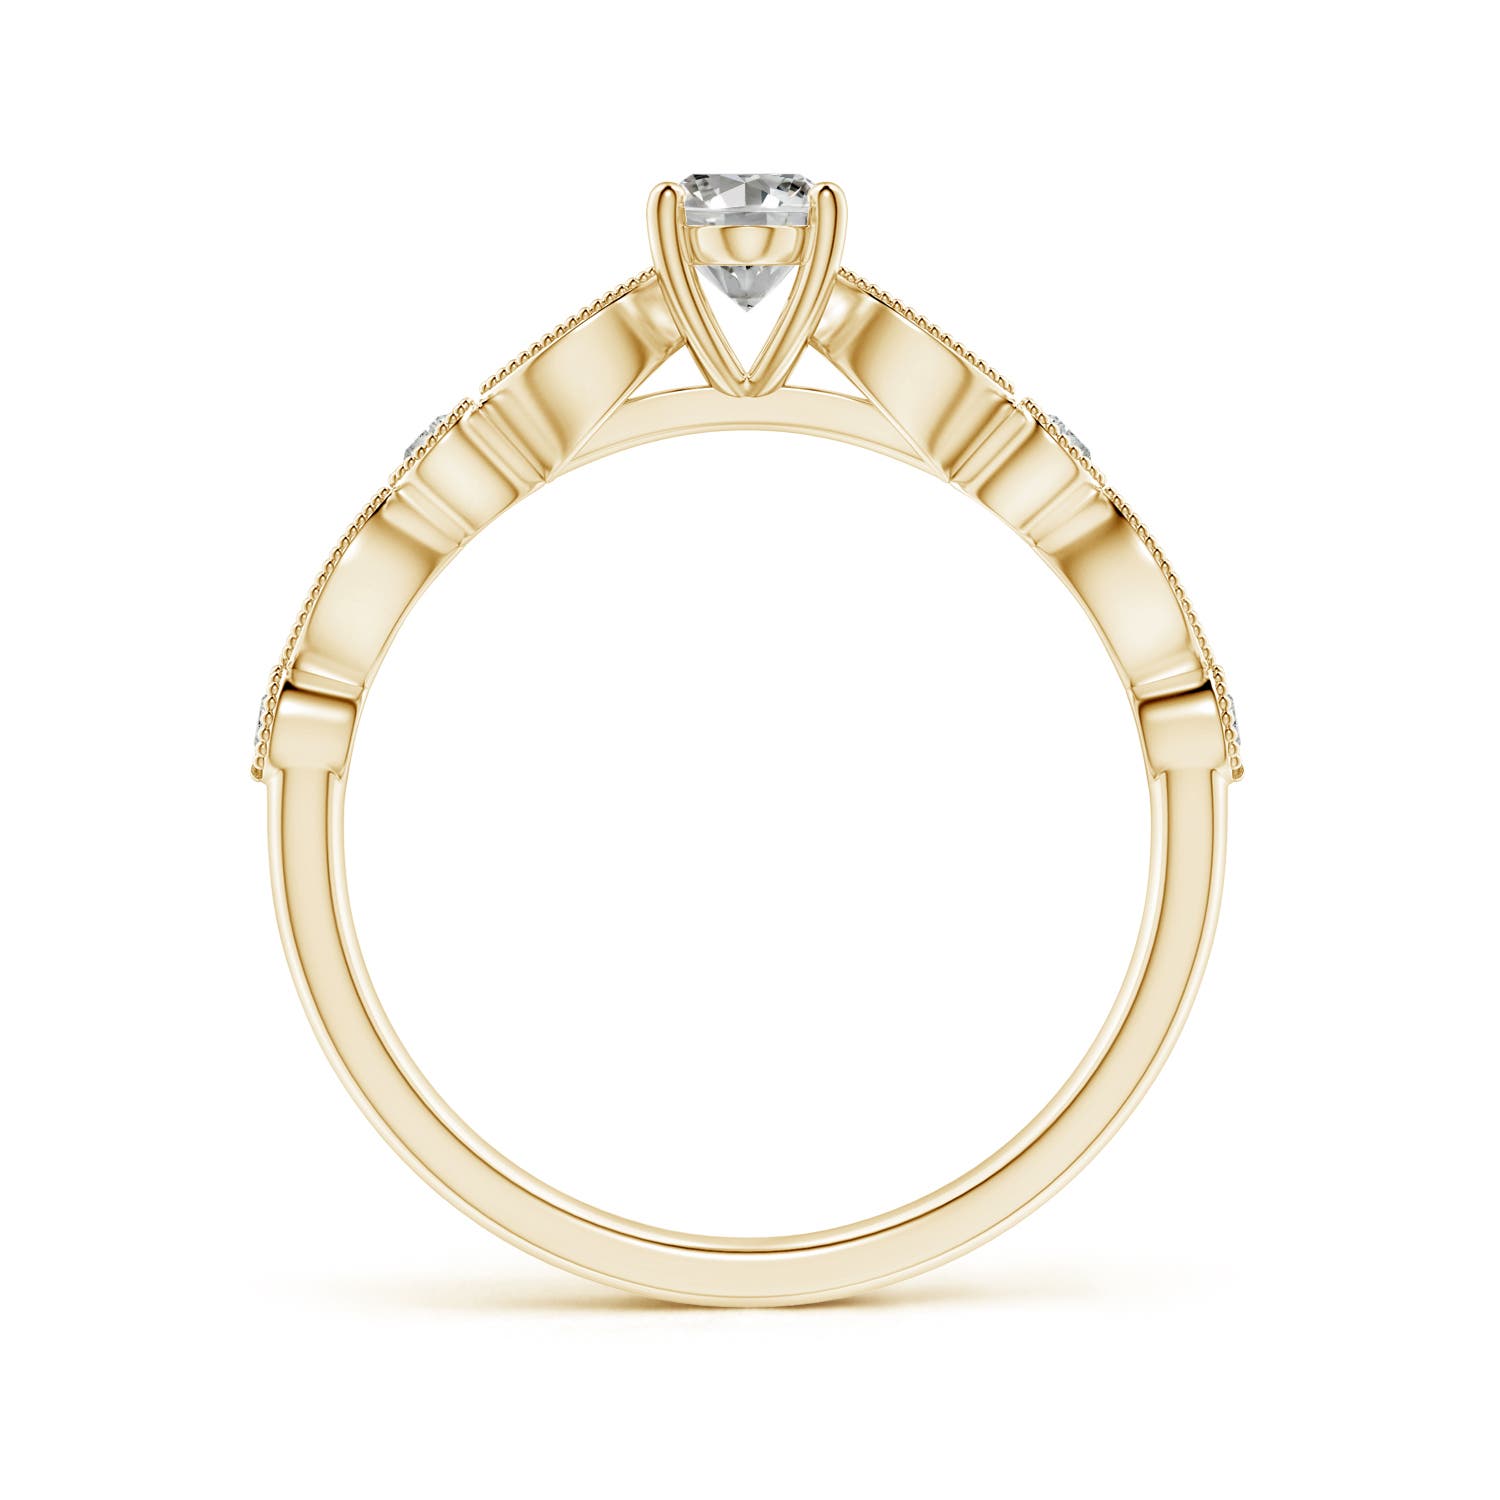 K, I3 / 0.62 CT / 14 KT Yellow Gold